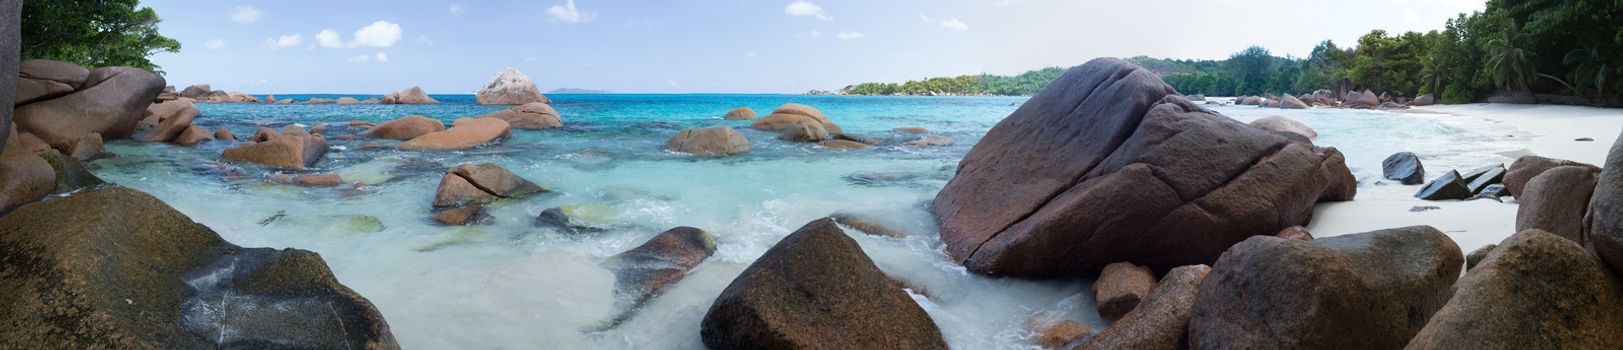 The beach of the Seychelles with blue water and stones